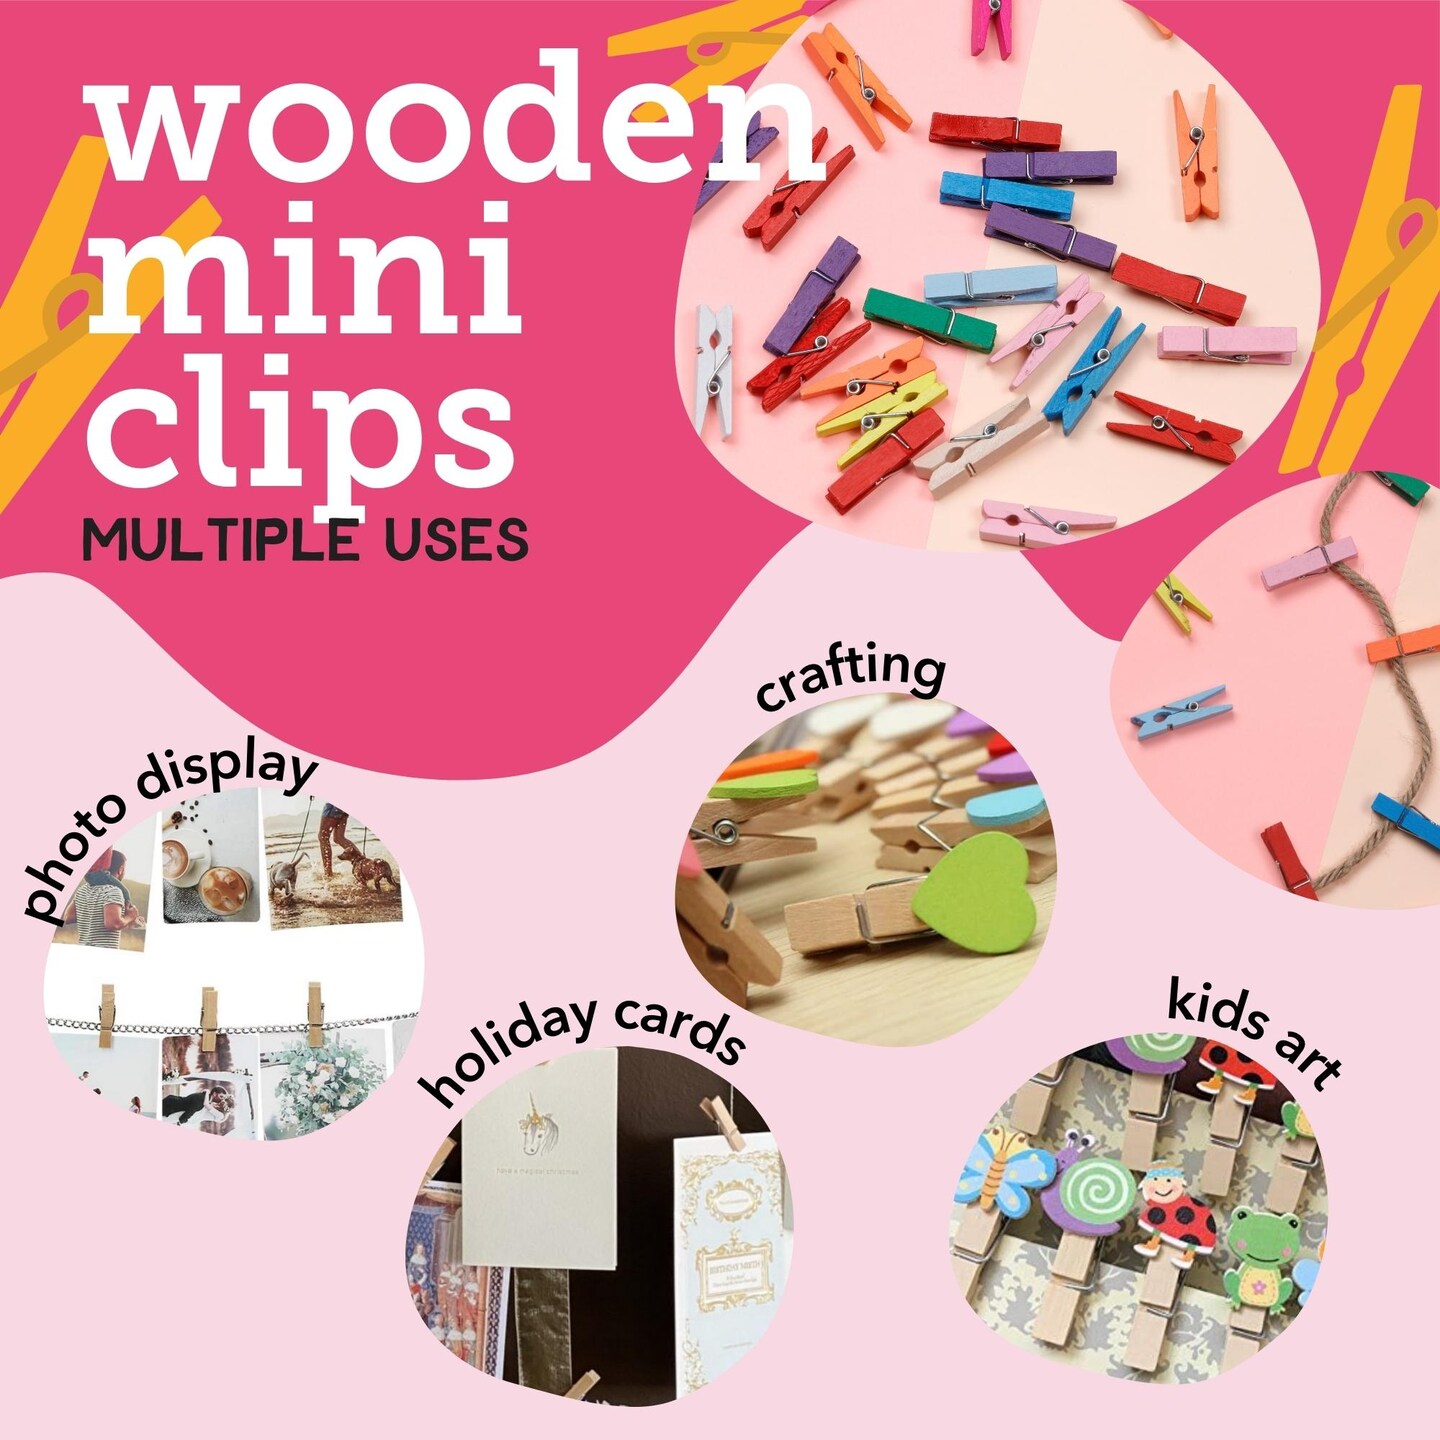 Mini Clothespins, Mini Clothes Pins for Photo Natural Wooden Small Picture  Clips for Crafts 1 Inch 100 PCS Tiny Pegs Decorative Wood Clips for Wall